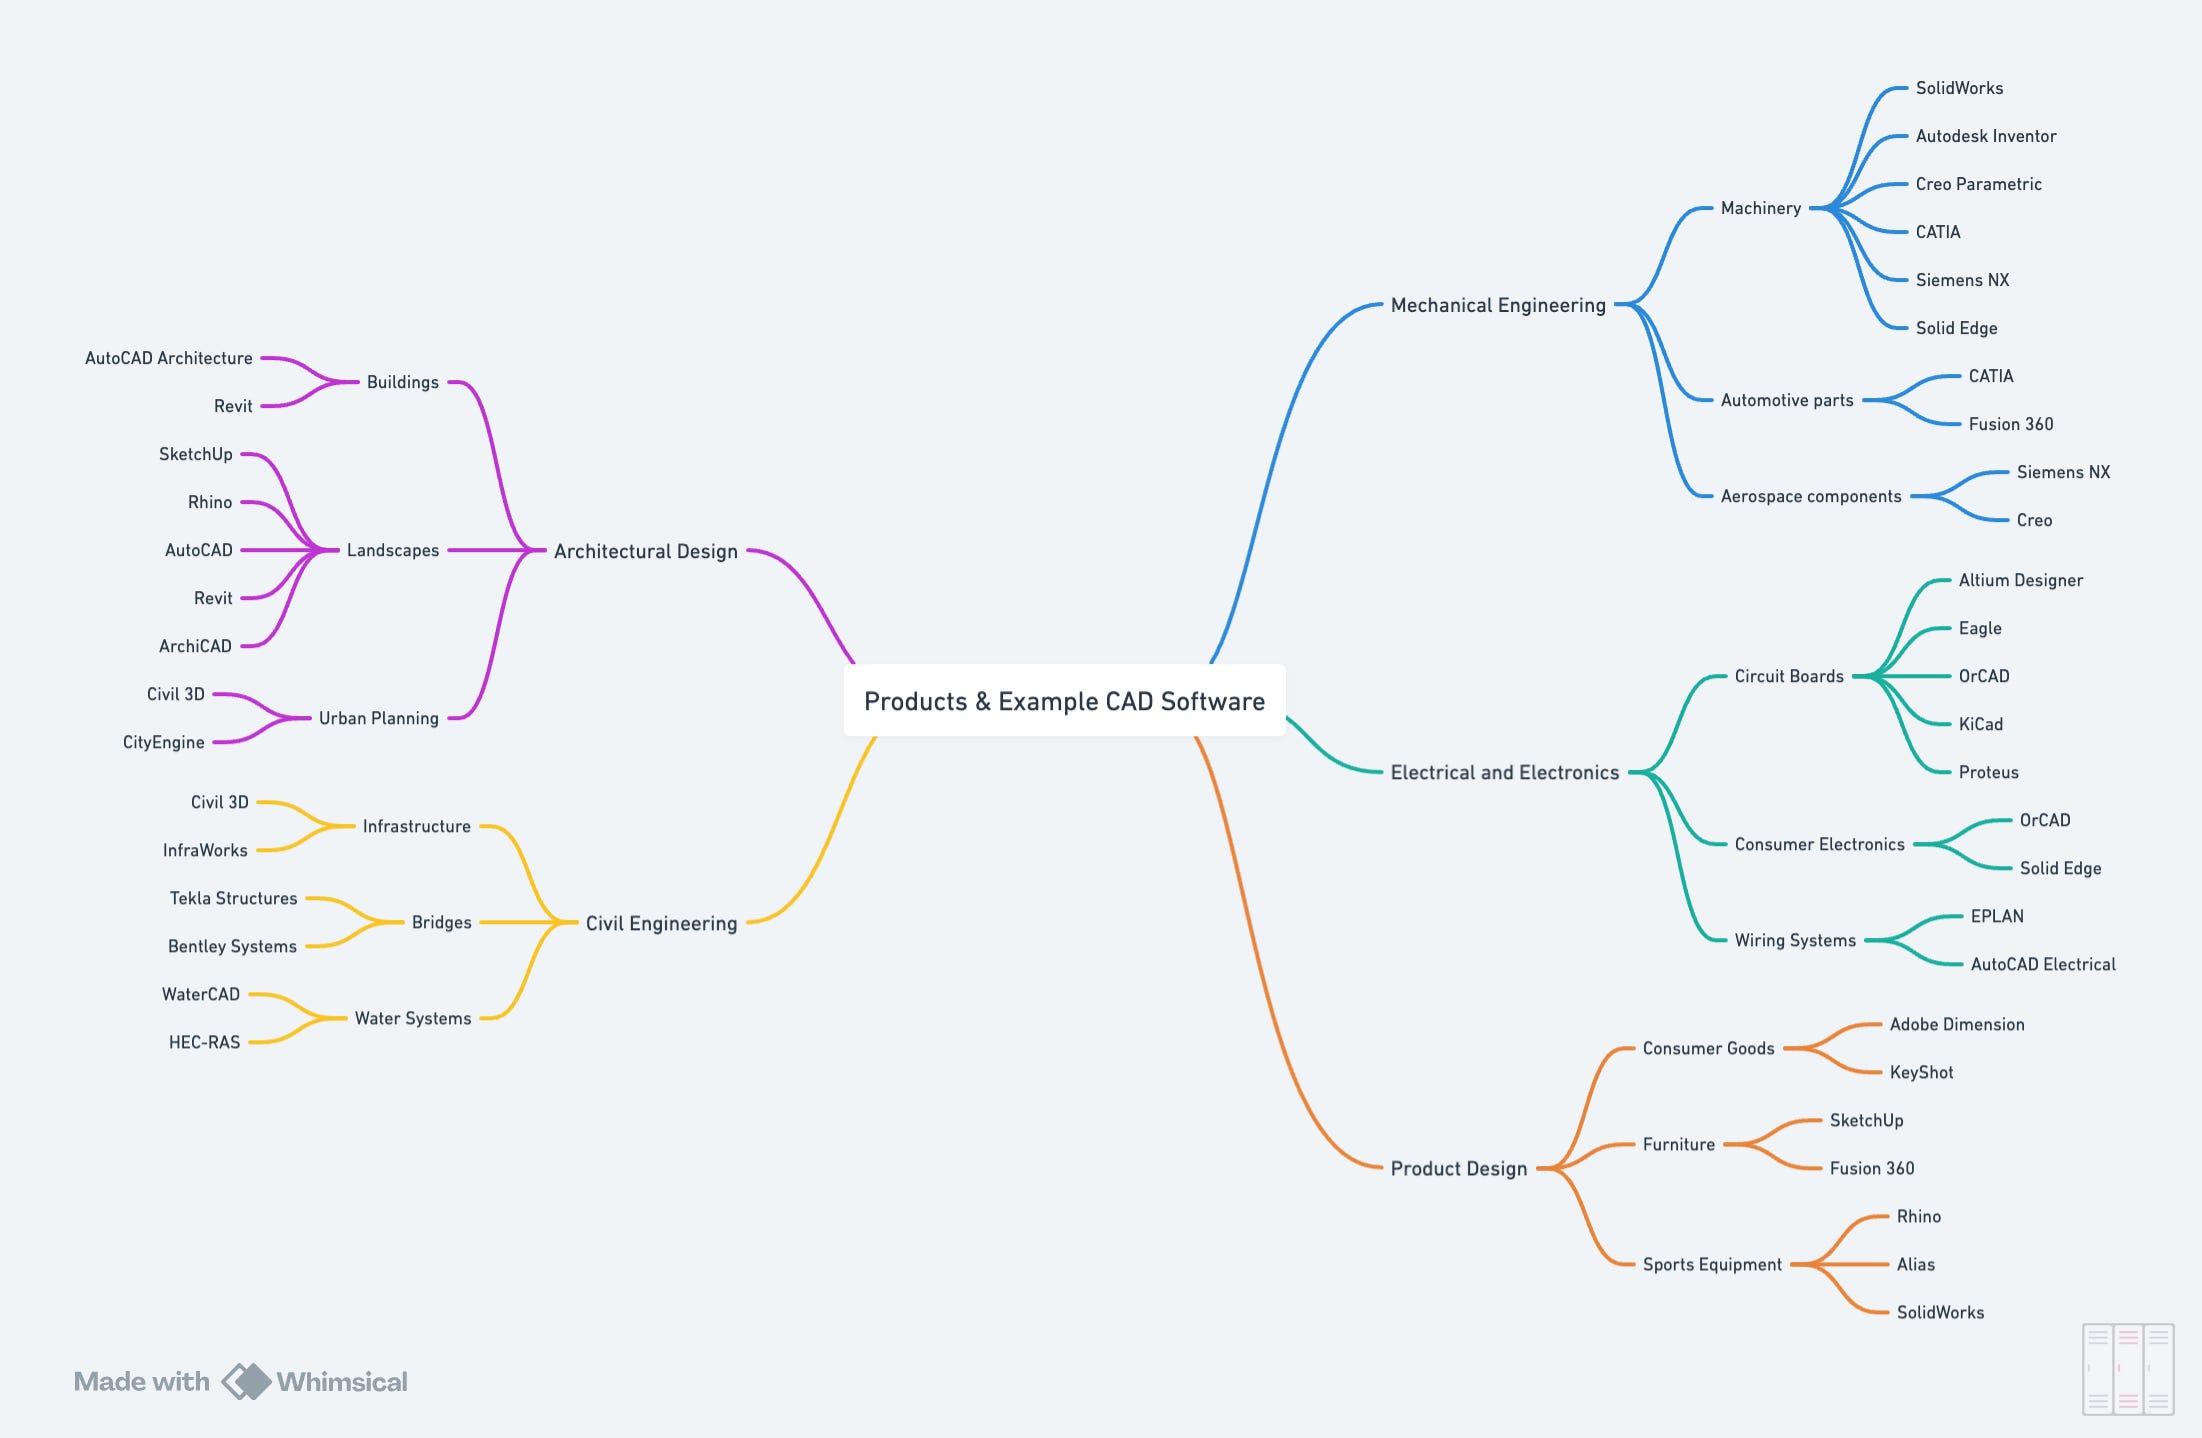 Mind map of CAD Software options for specific industry needs